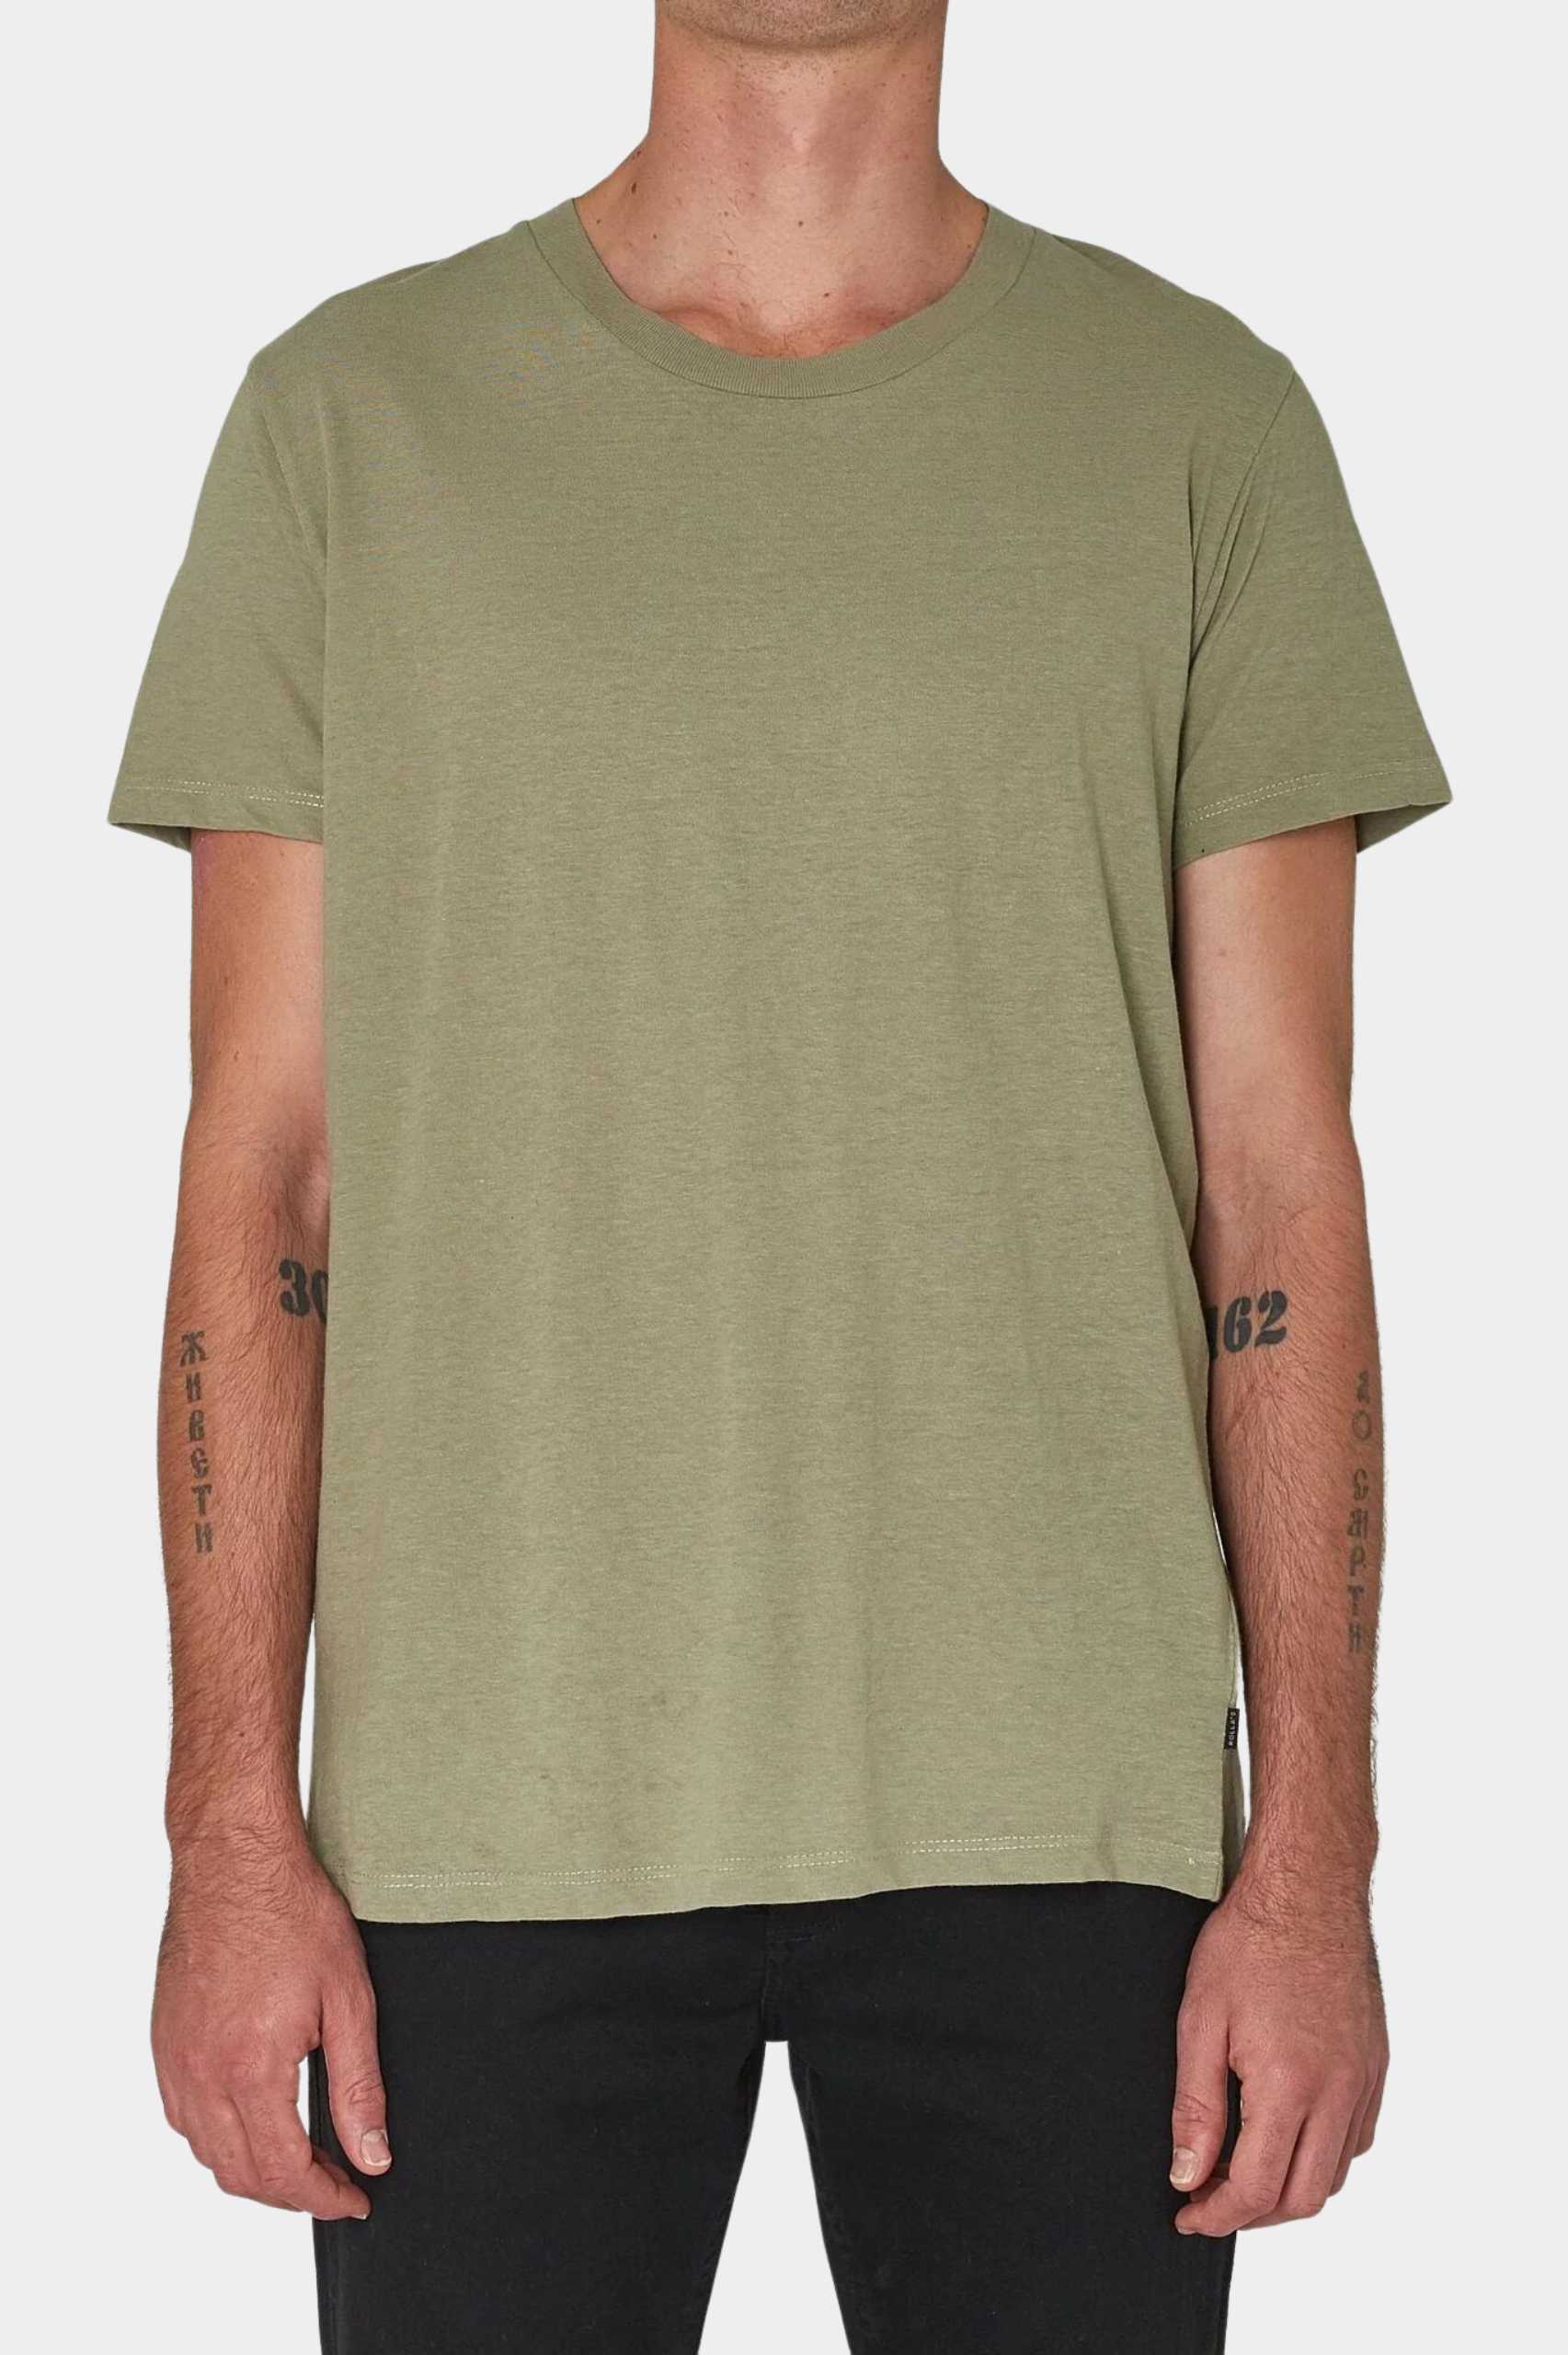 Rolla's Old Mate Tee in Moss